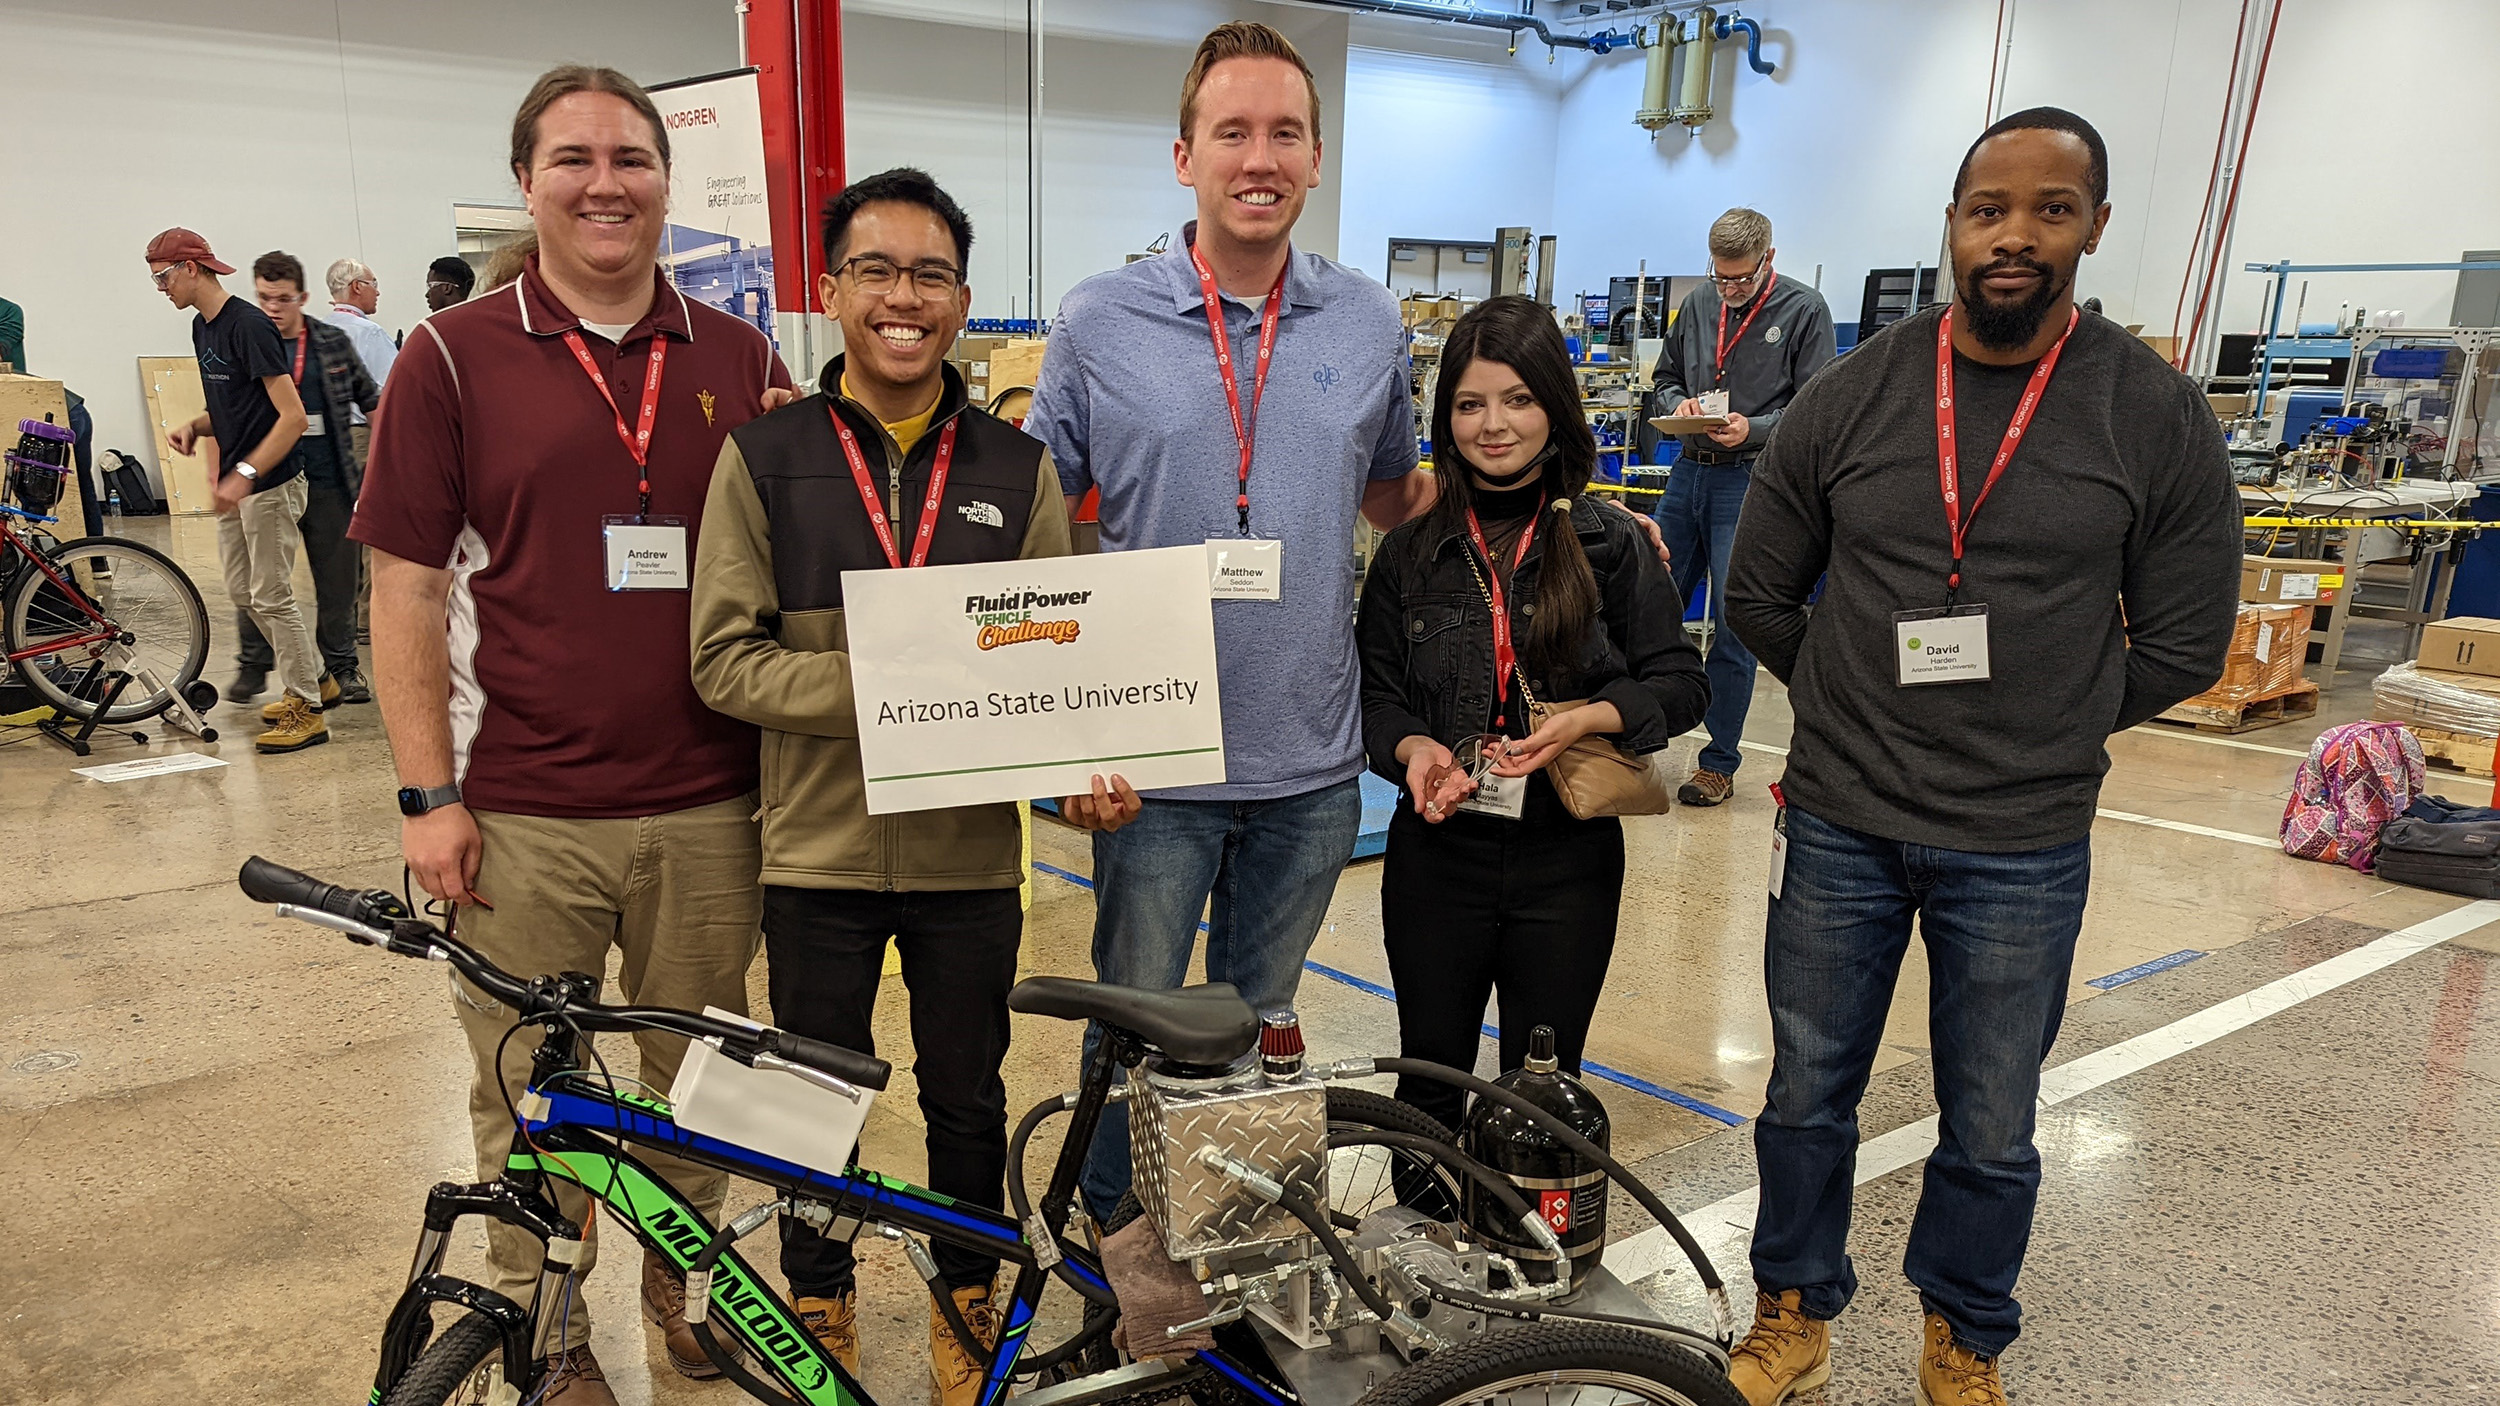 A group photo of the ASU Power Vehicle Challenge team at the 2021-2022 Fluid Power Vehicle Challenge organized by the National Fluid Power Association in Littleton, Colorado.